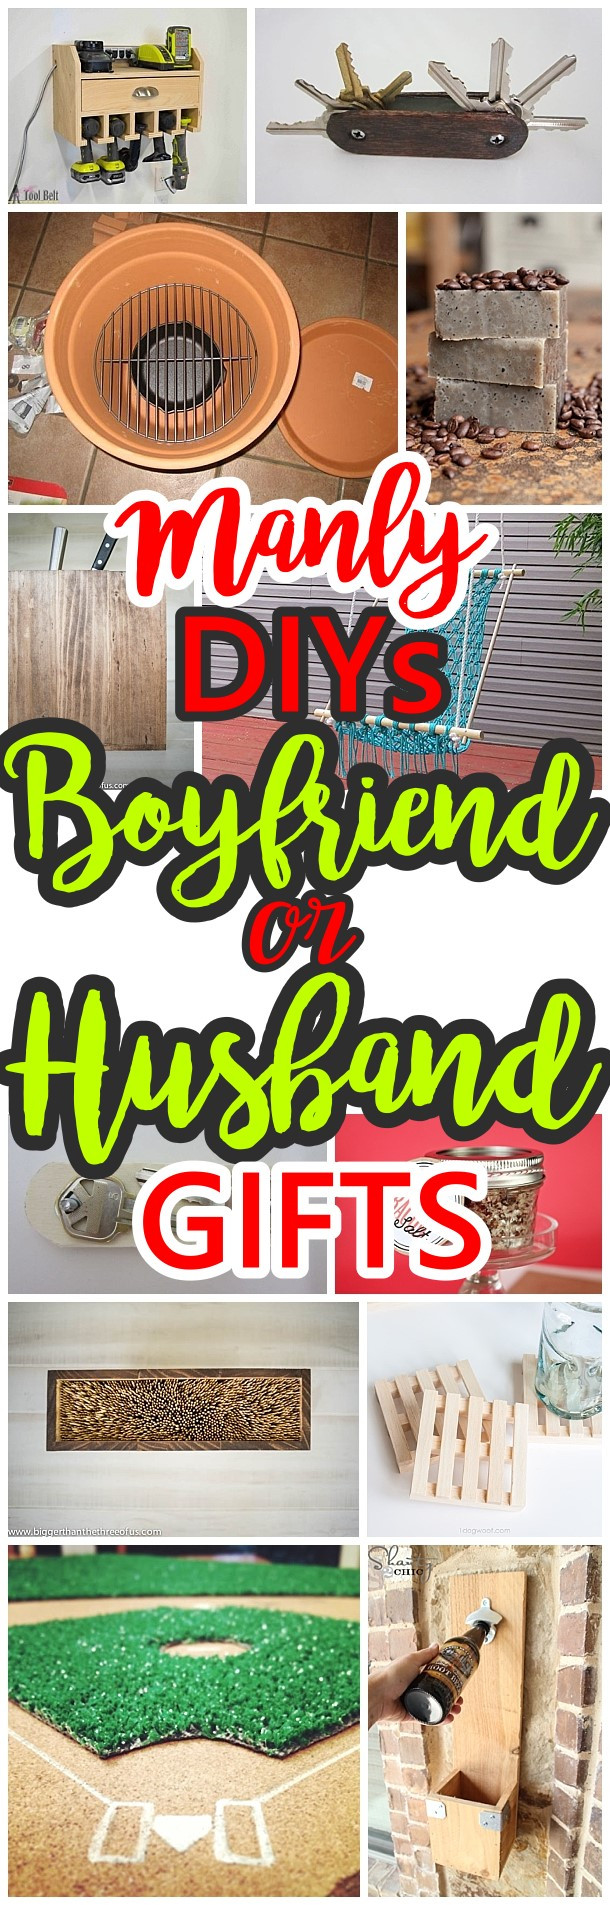 DIY Anniversary Gifts For Husband
 Manly Do It Yourself Boyfriend and Husband Gift Ideas